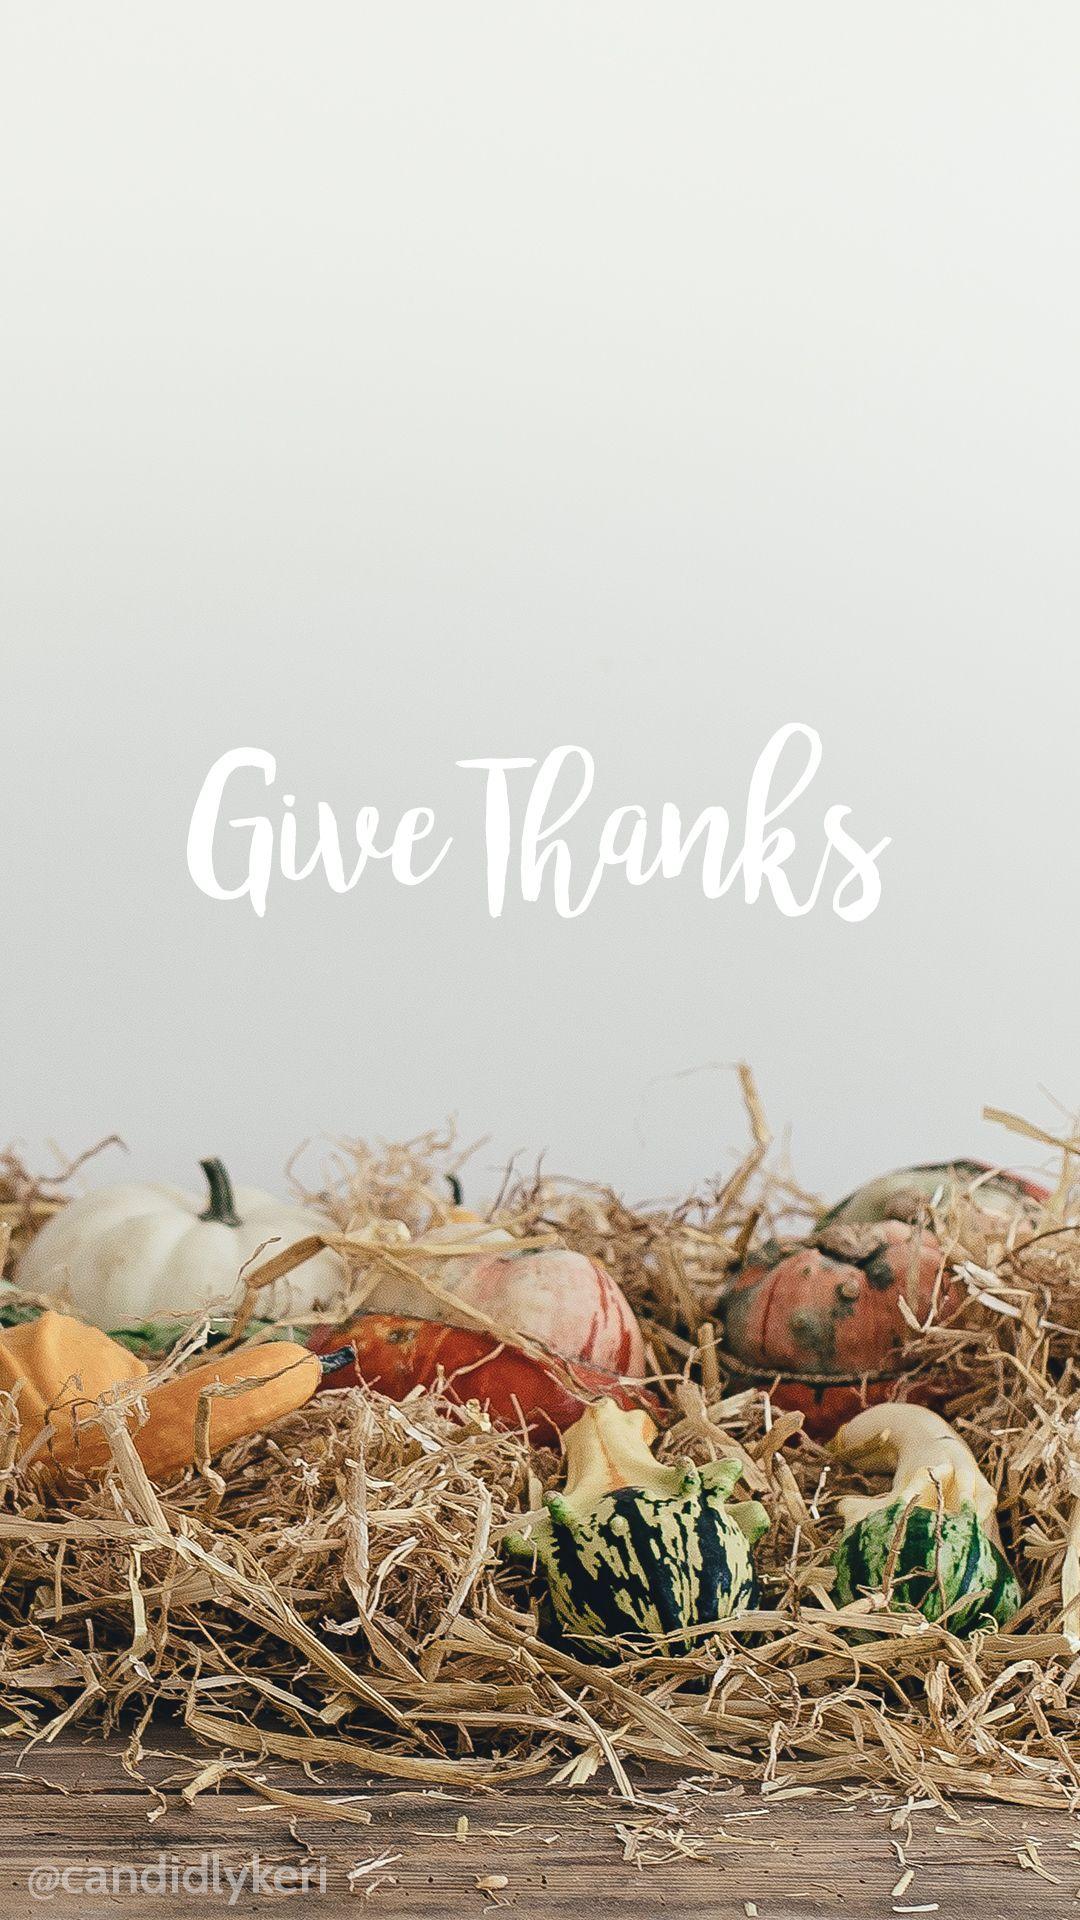 Give Thanks Thanksgiving gords pumpkins set up background wallpaper you can downlo. Thanksgiving iphone wallpaper, Thanksgiving wallpaper, Thanksgiving background